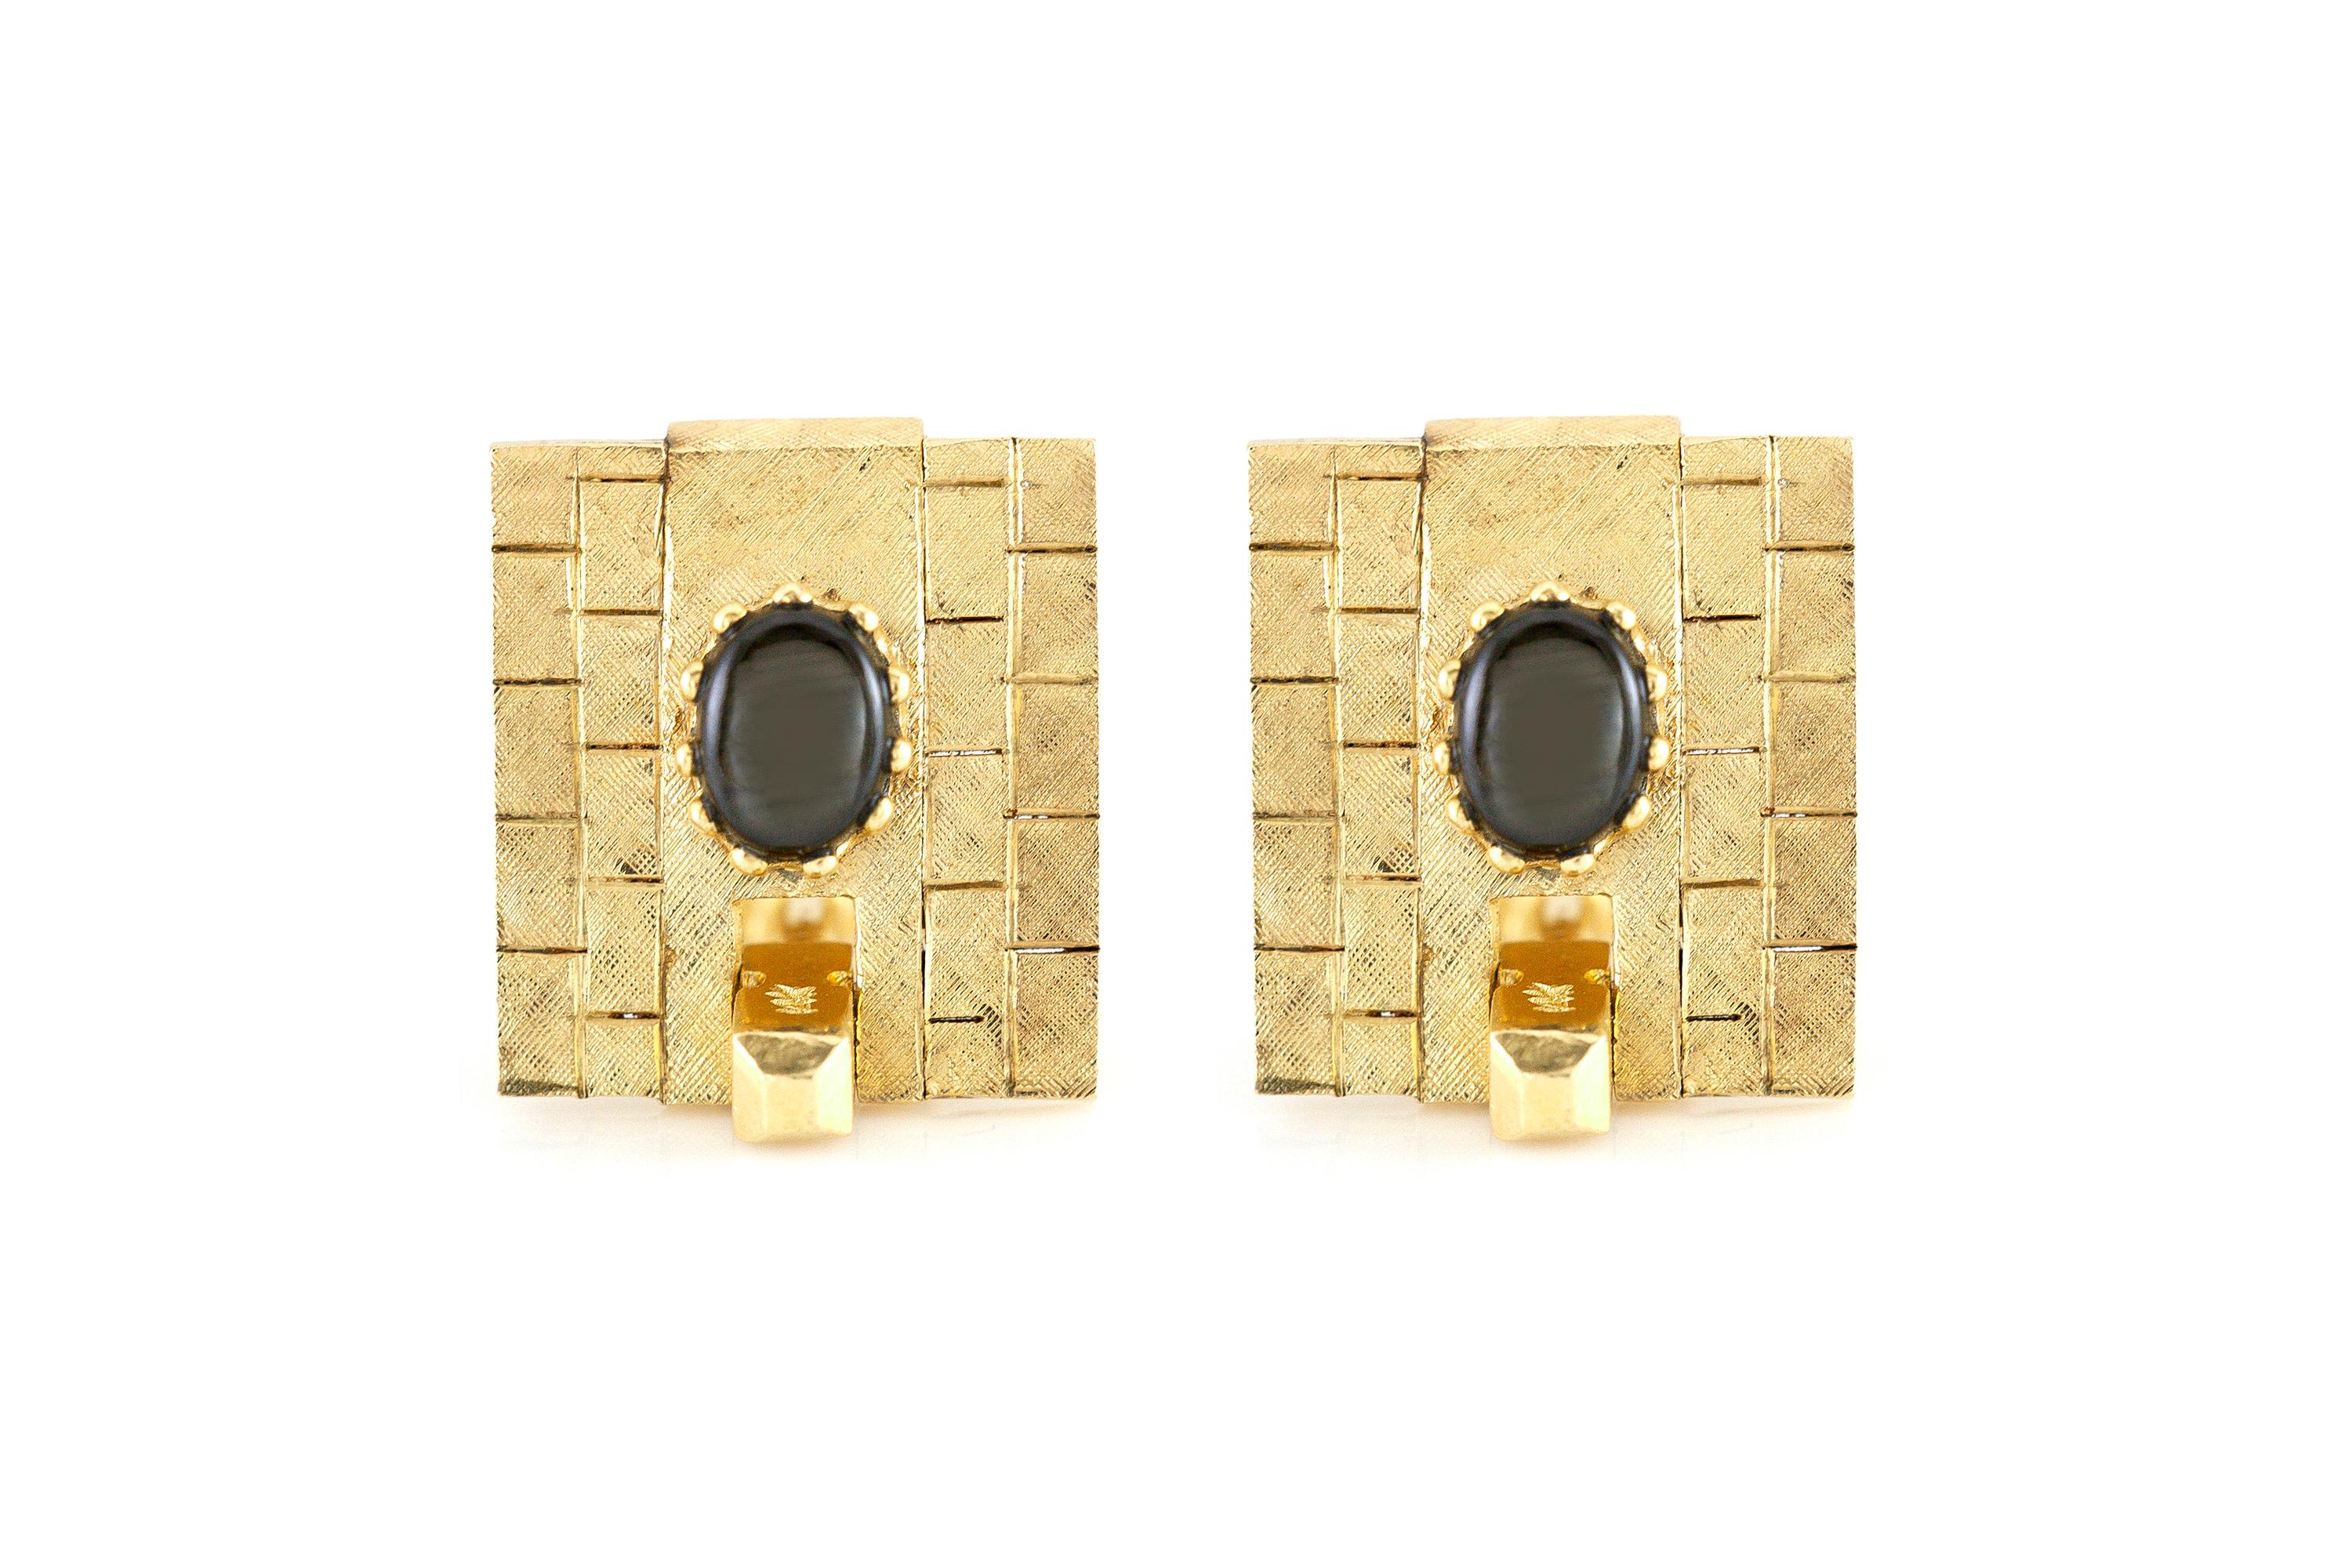 Cufflinks finely crafted in 14k yellow gold weighing a total of 12.7 dwt., size of each cufflink is 1.15 inch. Circa 1960.